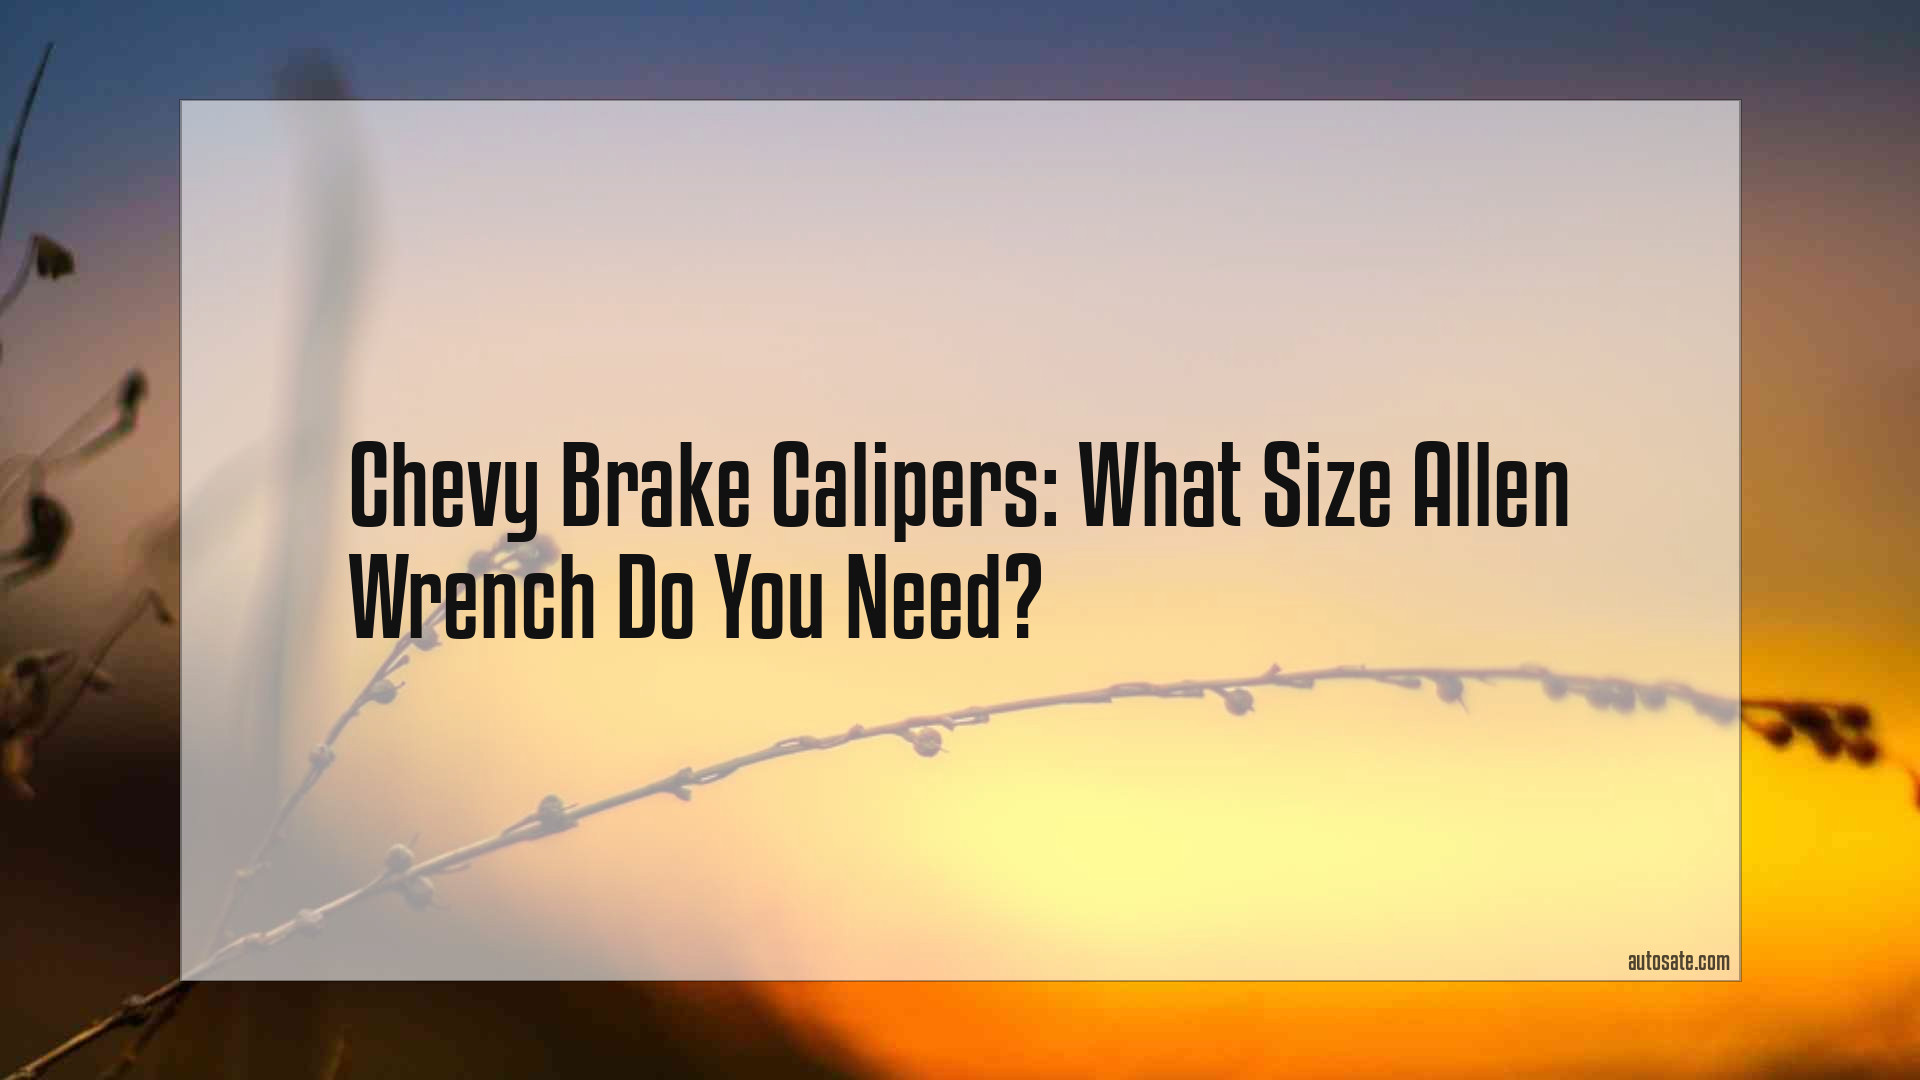 Chevy Brake Calipers: What Size Allen Wrench Do You Need?